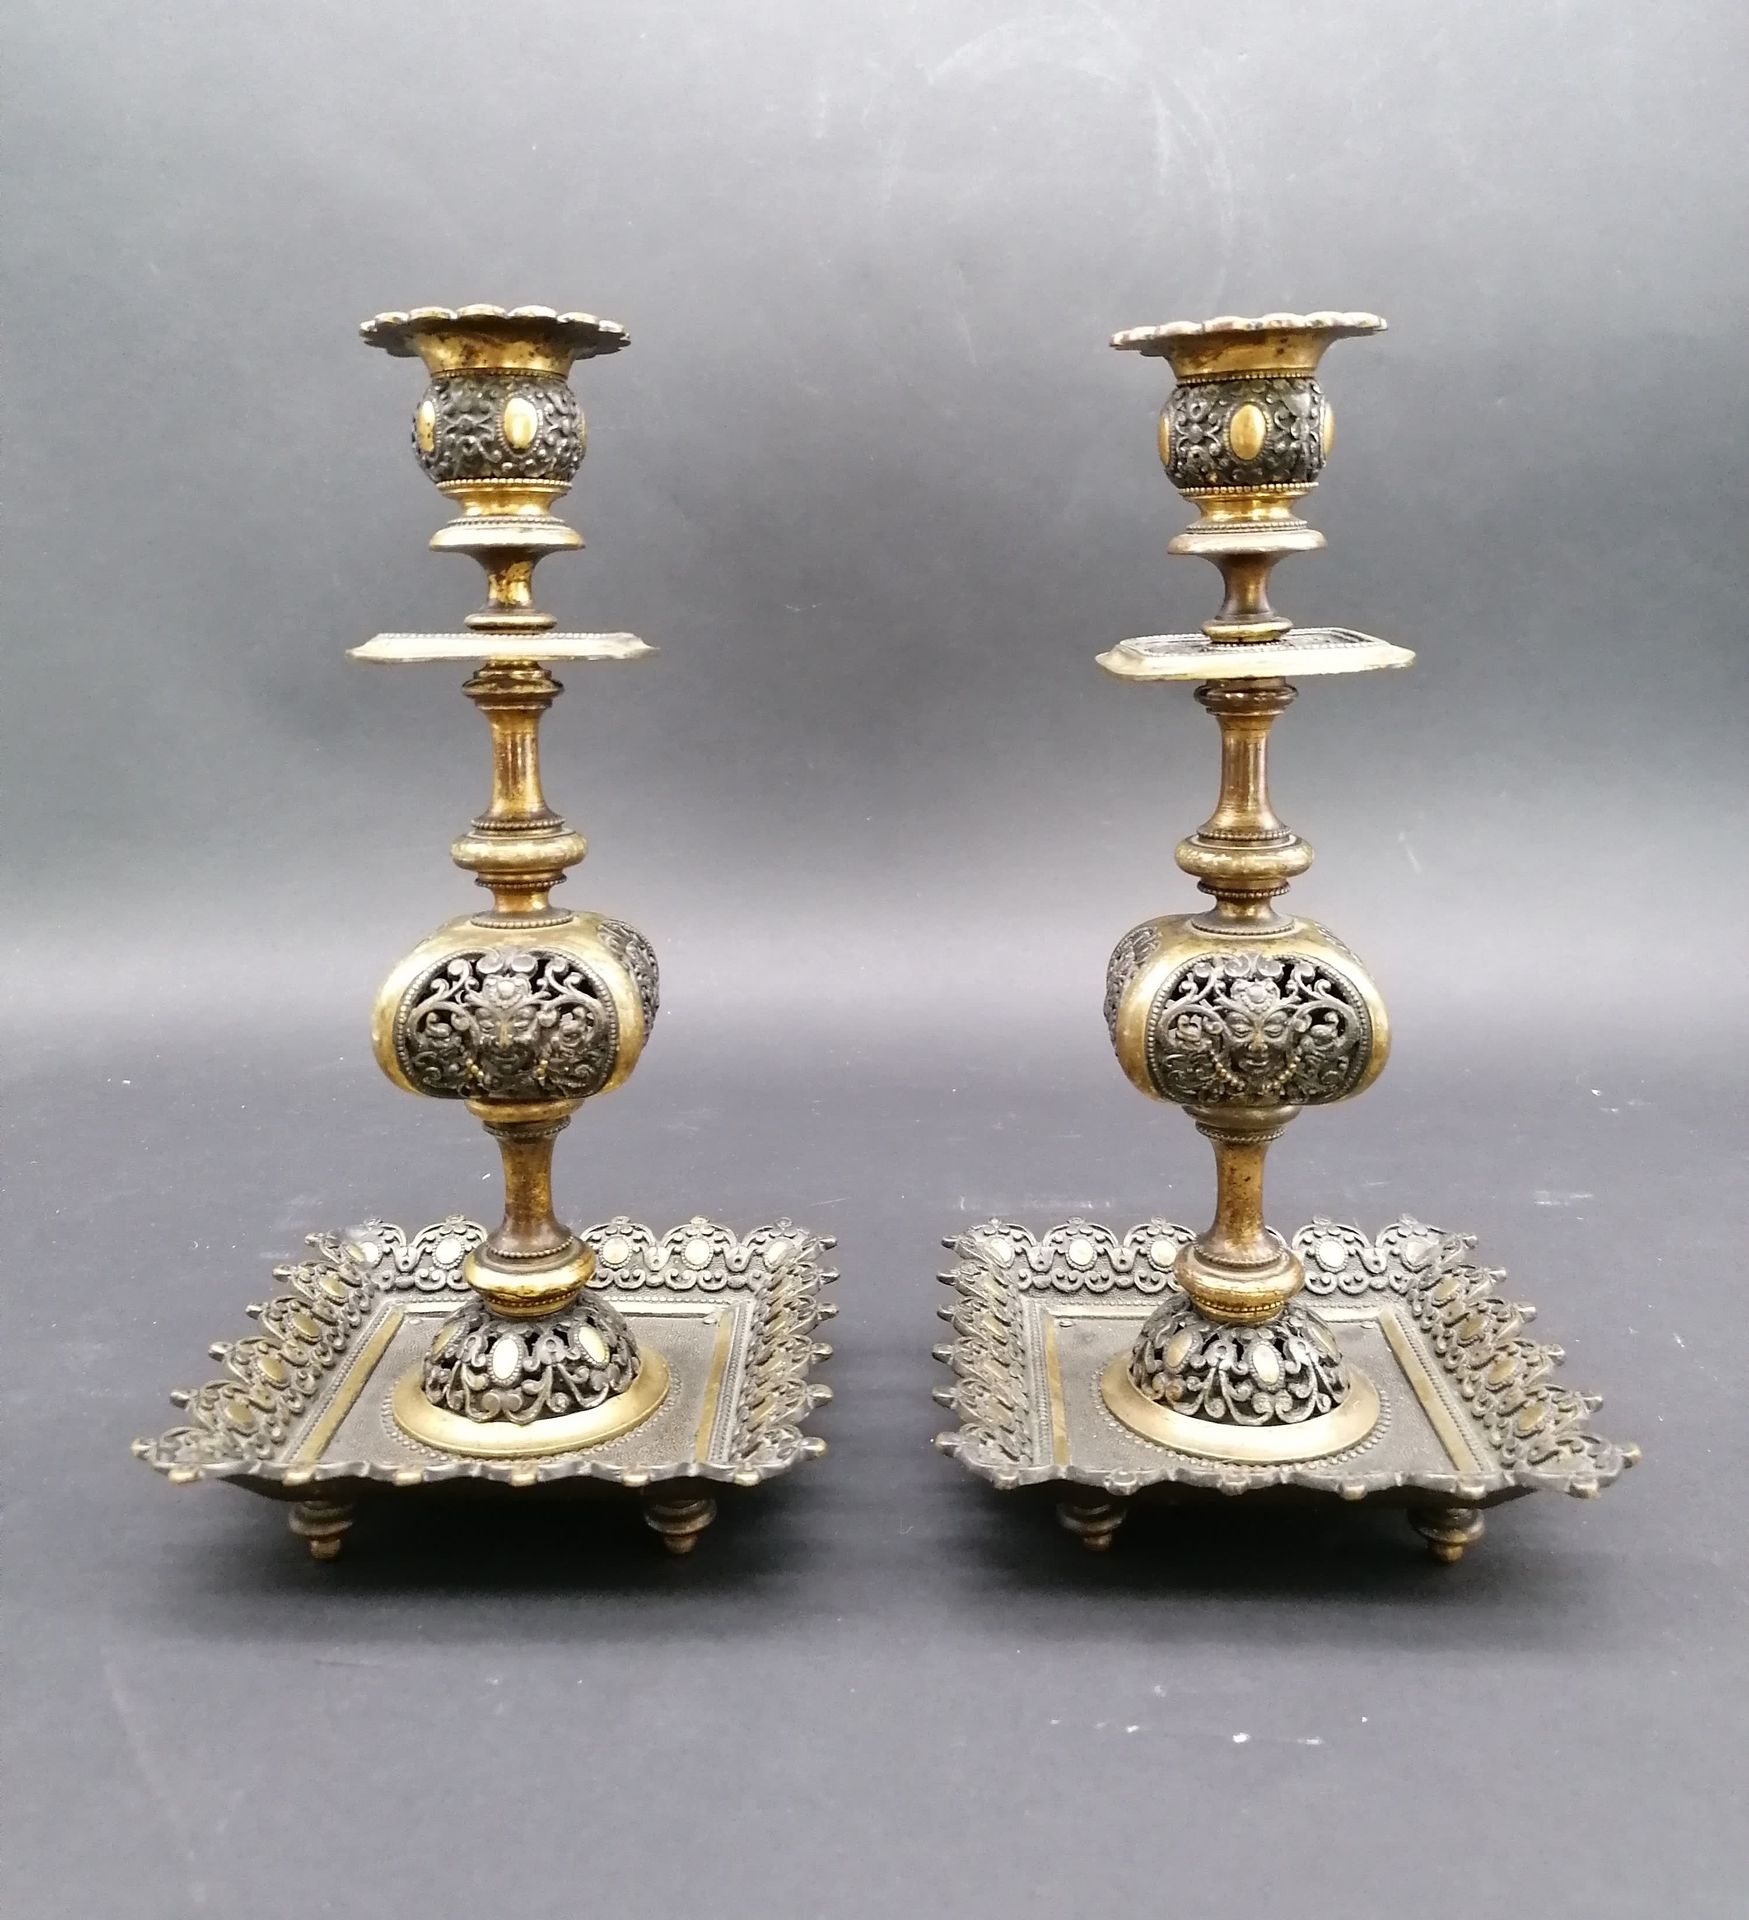 Null PAIR OF CANDLES in gilt bronze and patina

Baluster and openwork shaft

Dec&hellip;